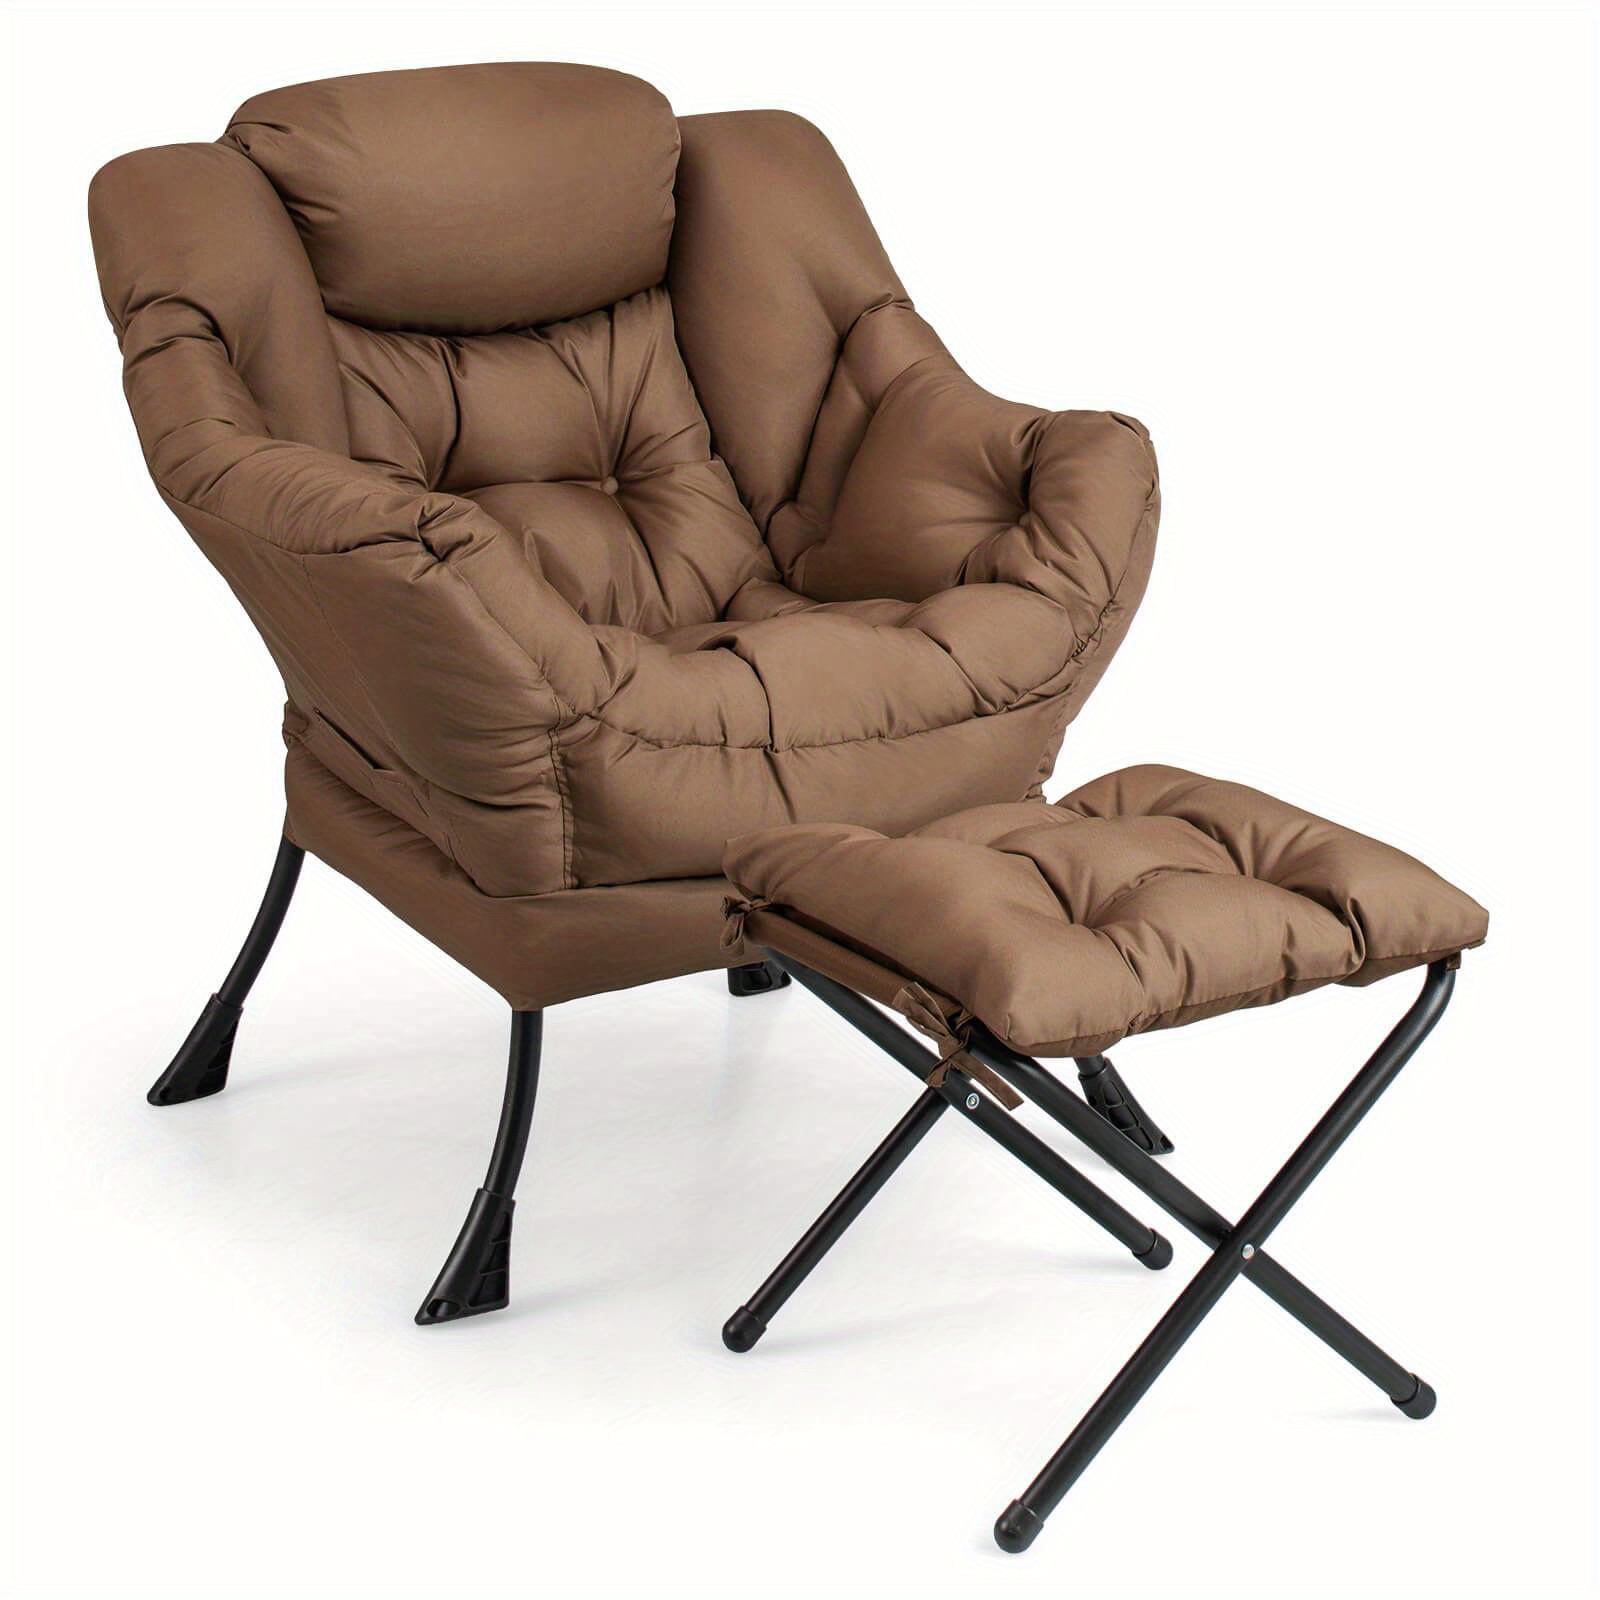 

Lazy Sofa Chair Accent Leisure Armchair With Folding Footrest & Storage Pocket